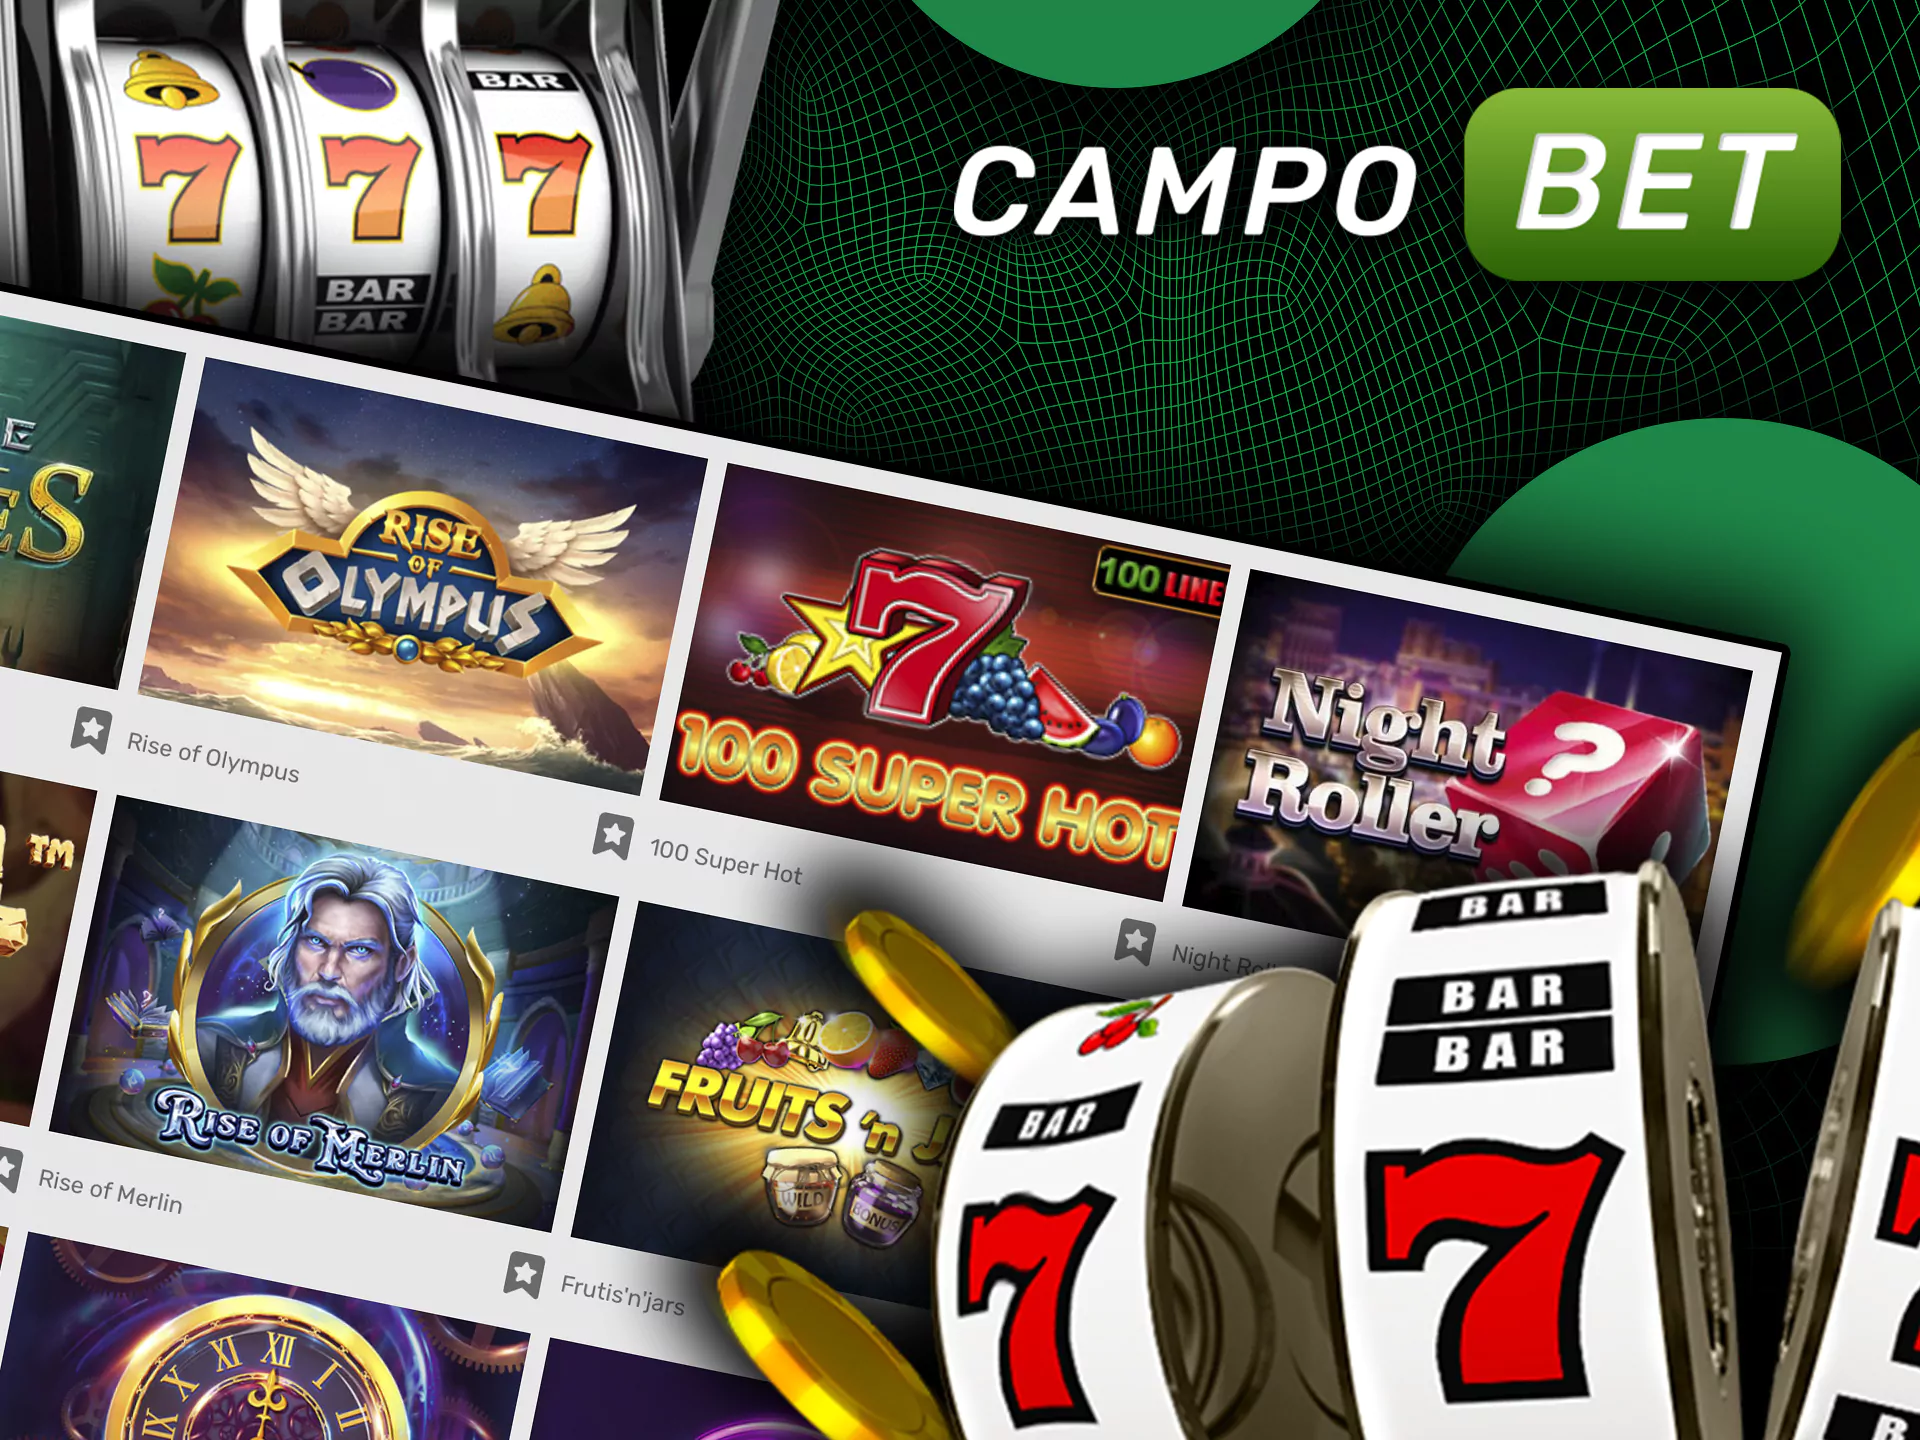 There are over a thousand slots on Campobet.